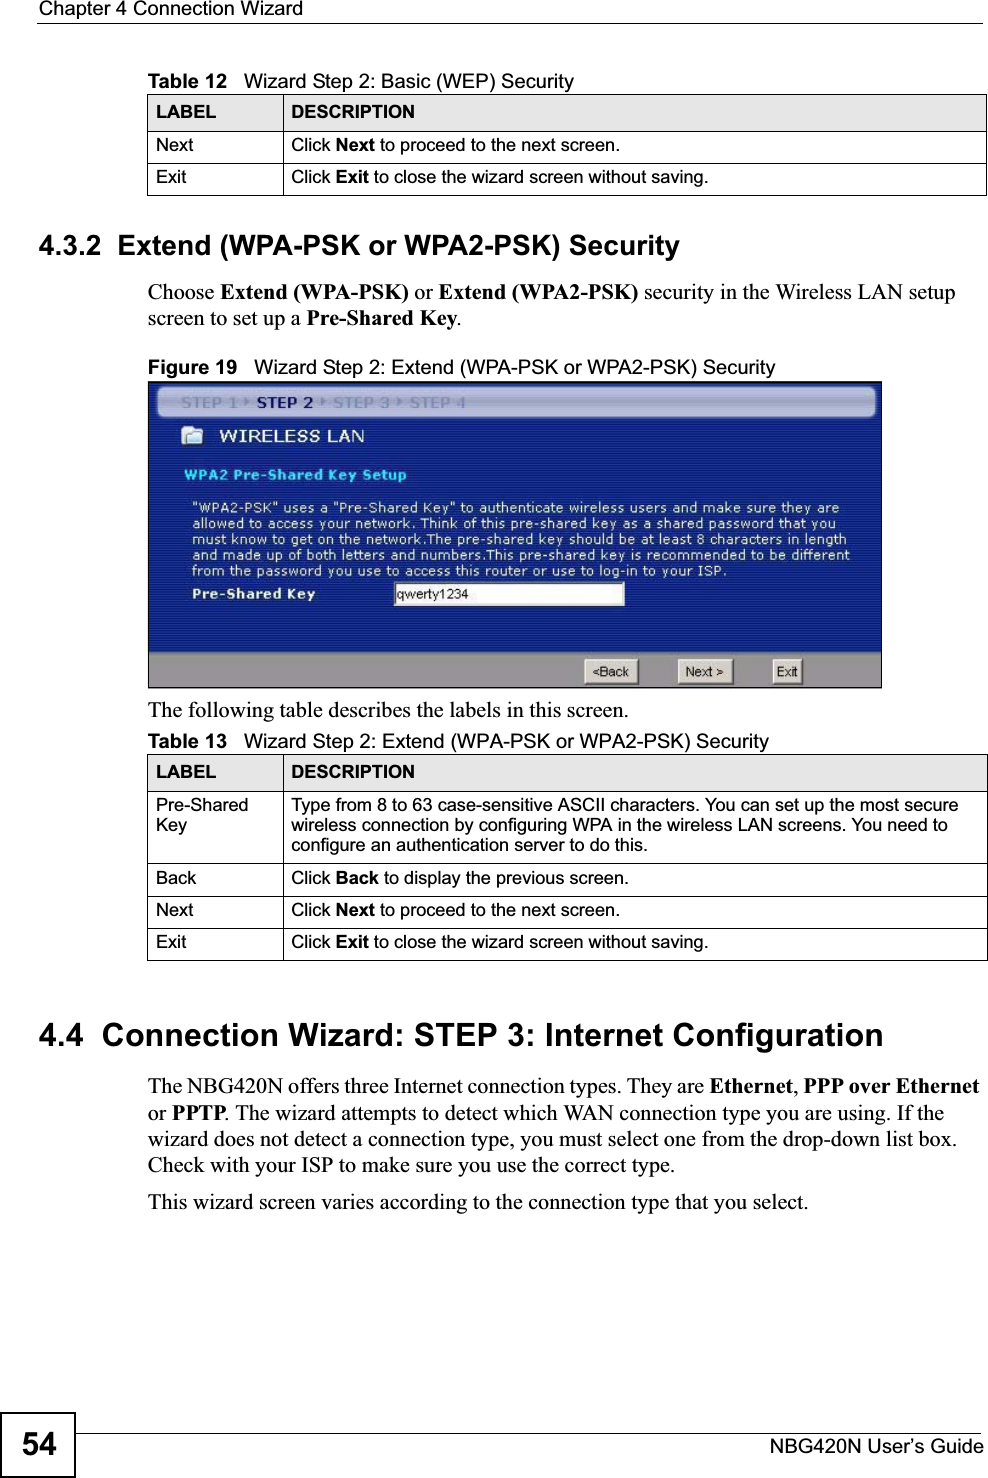 Chapter 4 Connection WizardNBG420N User’s Guide544.3.2  Extend (WPA-PSK or WPA2-PSK) SecurityChoose Extend (WPA-PSK) or Extend (WPA2-PSK) security in the Wireless LAN setup screen to set up a Pre-Shared Key.Figure 19   Wizard Step 2: Extend (WPA-PSK or WPA2-PSK) SecurityThe following table describes the labels in this screen. 4.4  Connection Wizard: STEP 3: Internet ConfigurationThe NBG420N offers three Internet connection types. They are Ethernet,PPP over Ethernet or PPTP. The wizard attempts to detect which WAN connection type you are using. If the wizard does not detect a connection type, you must select one from the drop-down list box. Check with your ISP to make sure you use the correct type.This wizard screen varies according to the connection type that you select.Next Click Next to proceed to the next screen. Exit Click Exit to close the wizard screen without saving.Table 12   Wizard Step 2: Basic (WEP) SecurityLABEL DESCRIPTIONTable 13   Wizard Step 2: Extend (WPA-PSK or WPA2-PSK) SecurityLABEL DESCRIPTIONPre-Shared KeyType from 8 to 63 case-sensitive ASCII characters. You can set up the most secure wireless connection by configuring WPA in the wireless LAN screens. You need to configure an authentication server to do this.Back Click Back to display the previous screen.Next Click Next to proceed to the next screen. Exit Click Exit to close the wizard screen without saving.